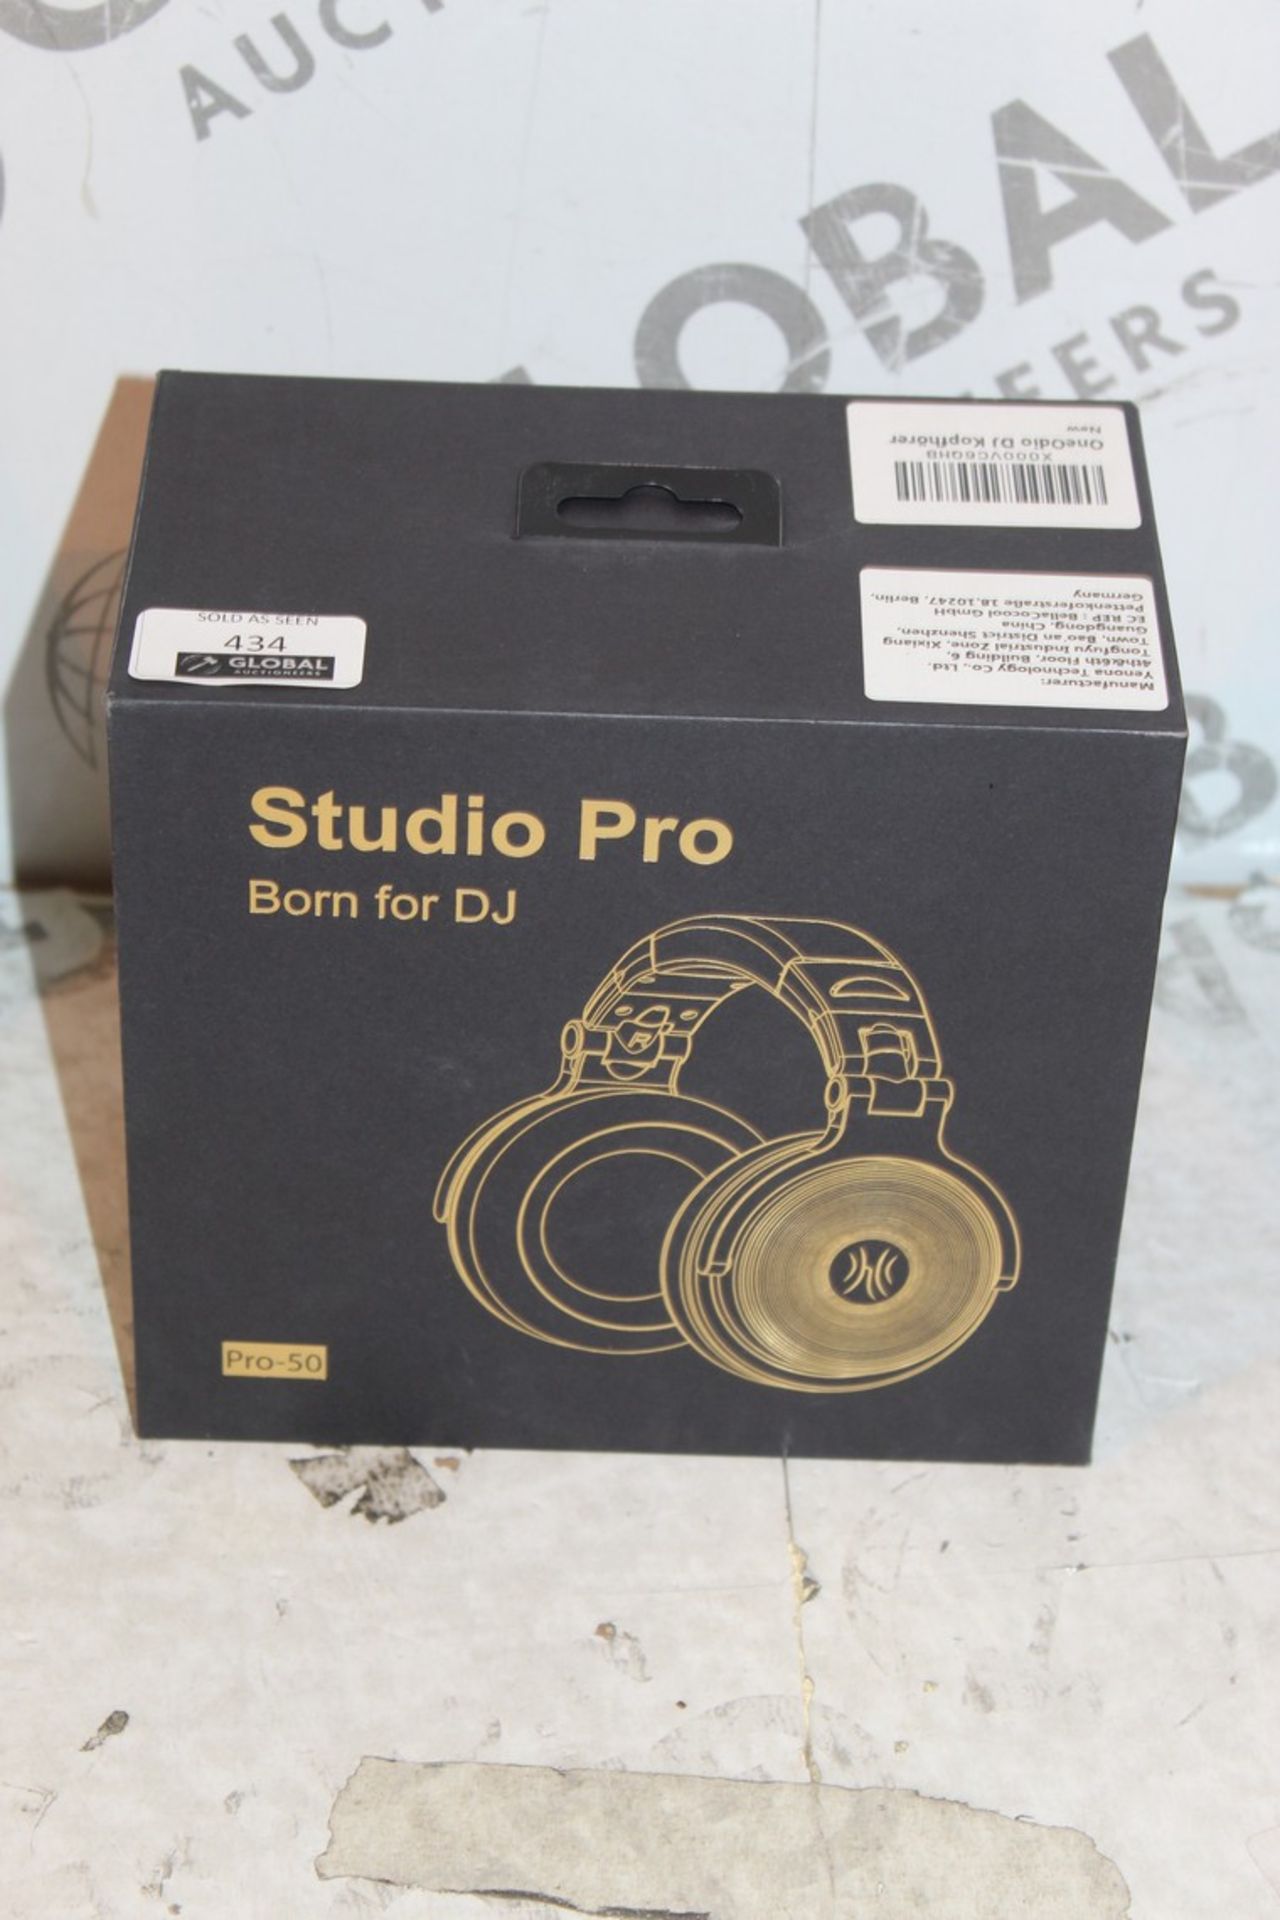 Boxed Pair Studio Pro Born TO DJ Pro 50 Headphones RRP £60 (Pictures Are For Illustration Purposes